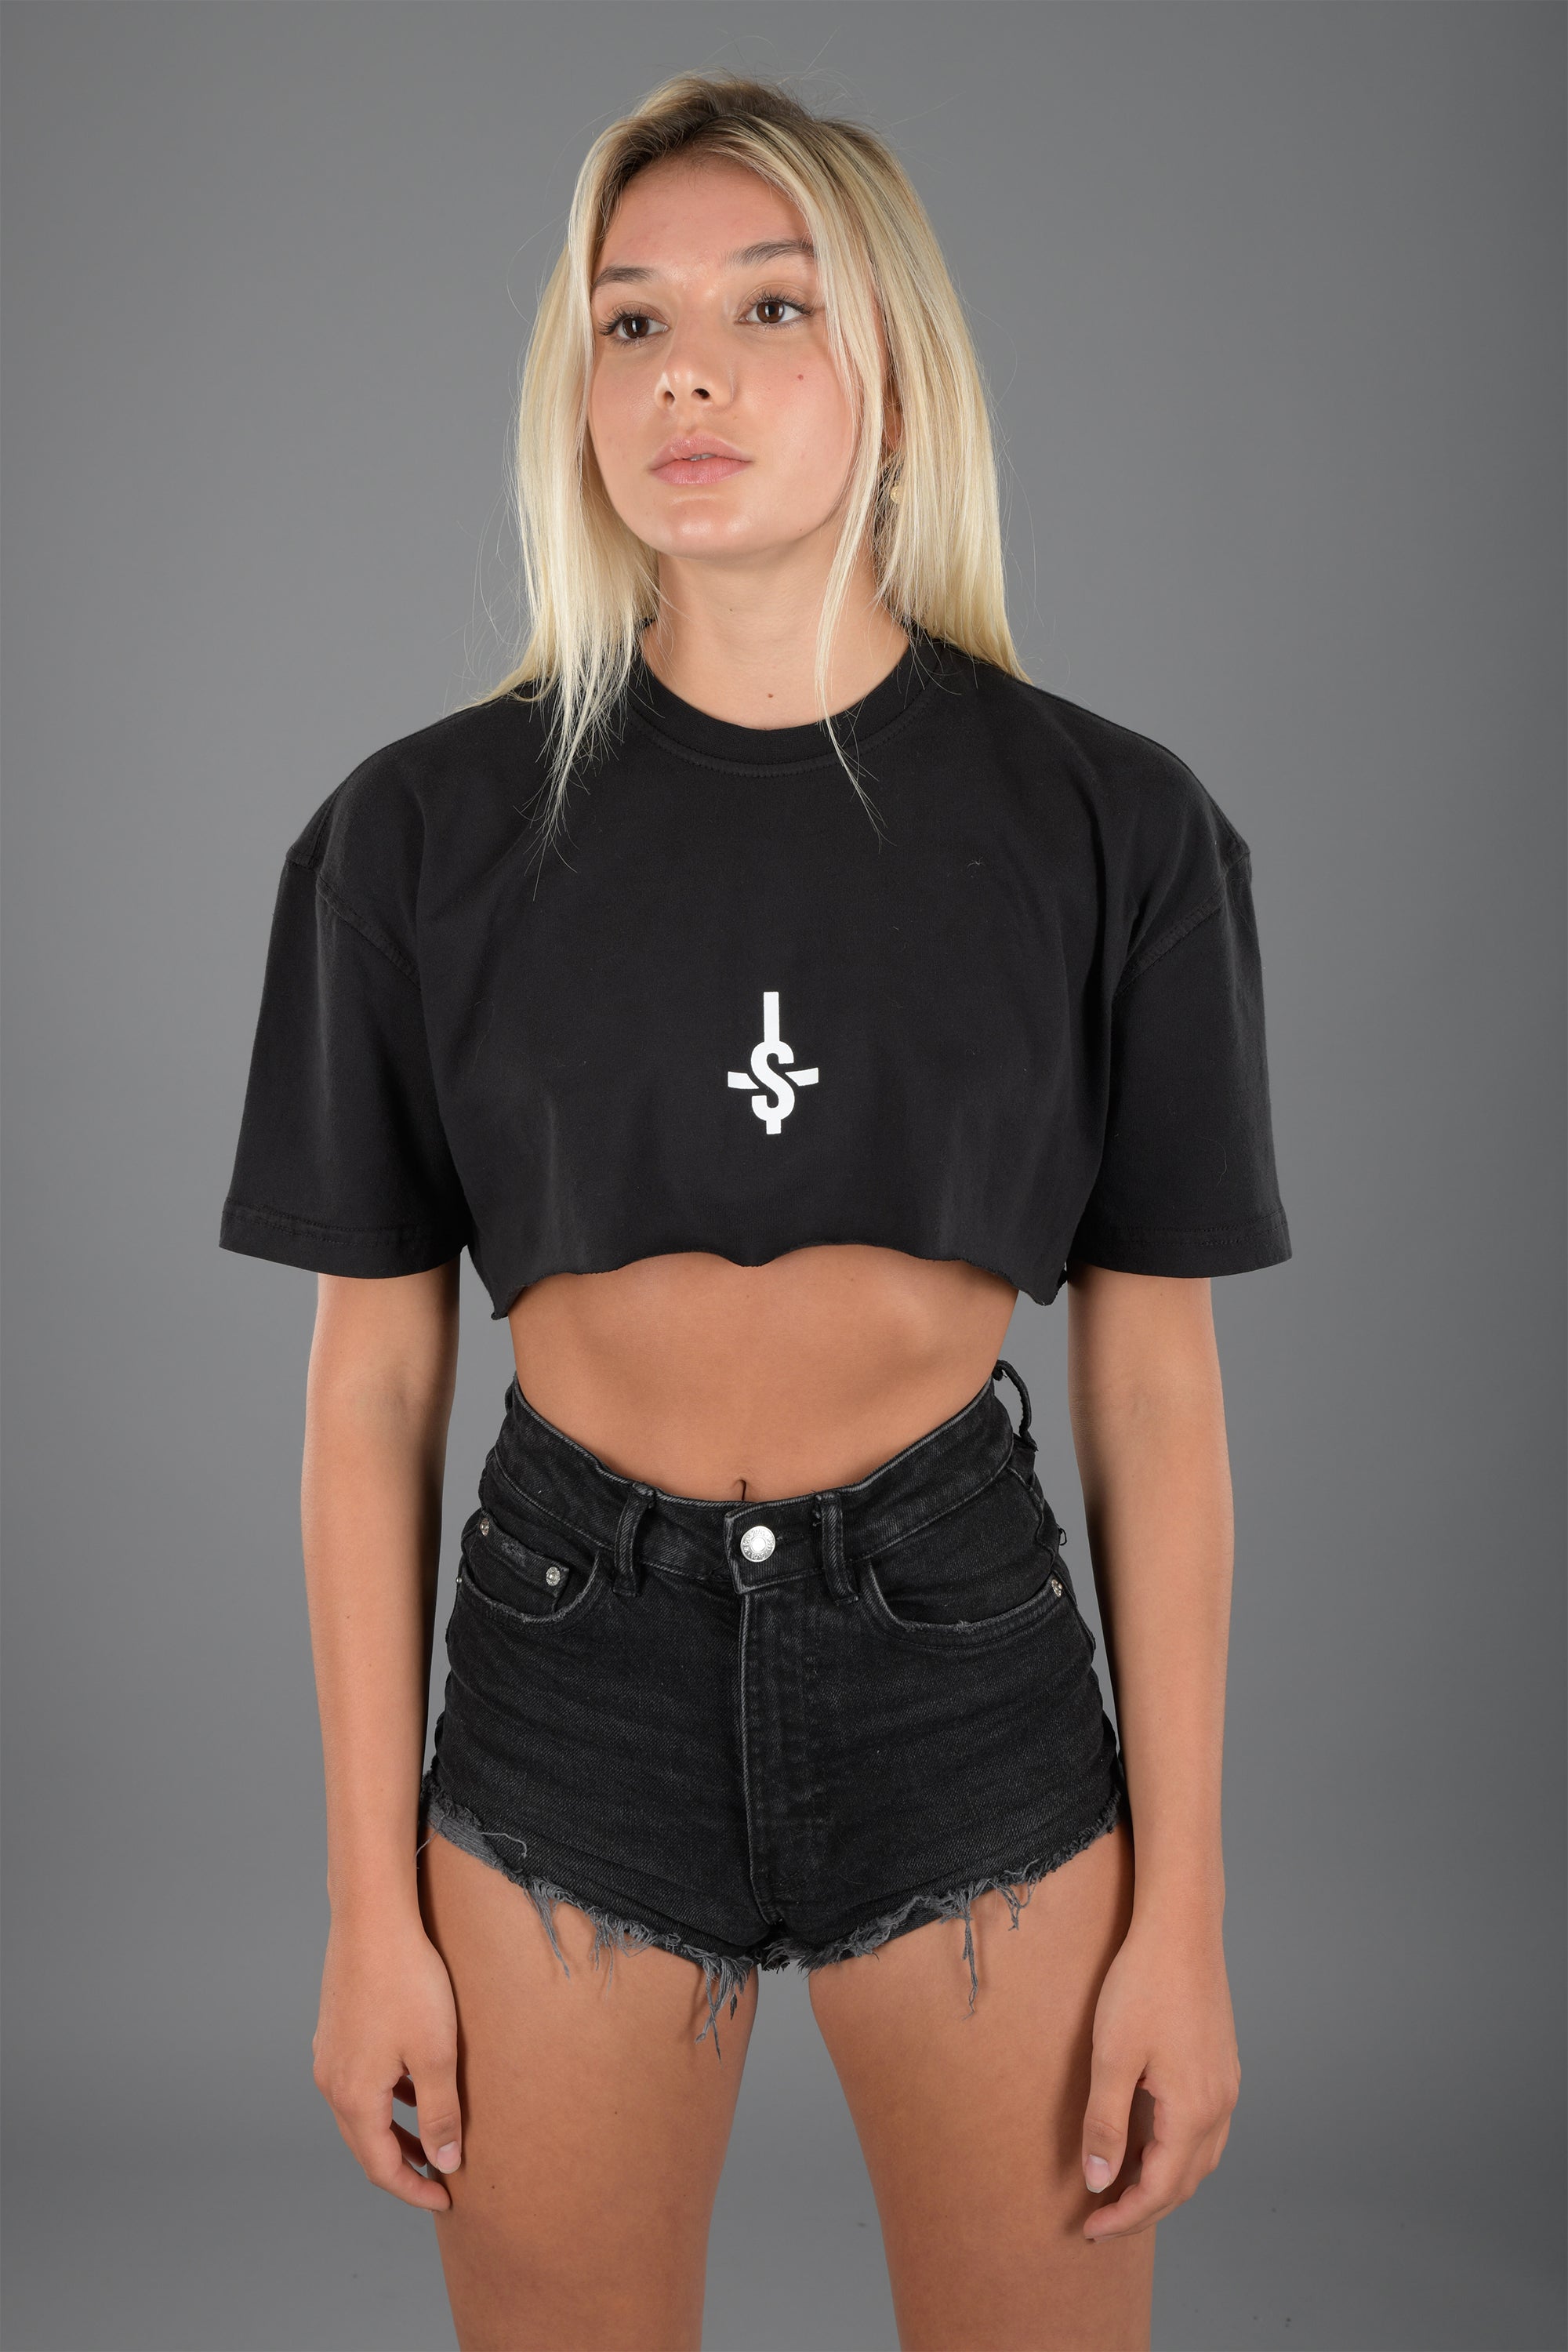 Shell Corp Logo Crop Top - Black - The Shell Corp